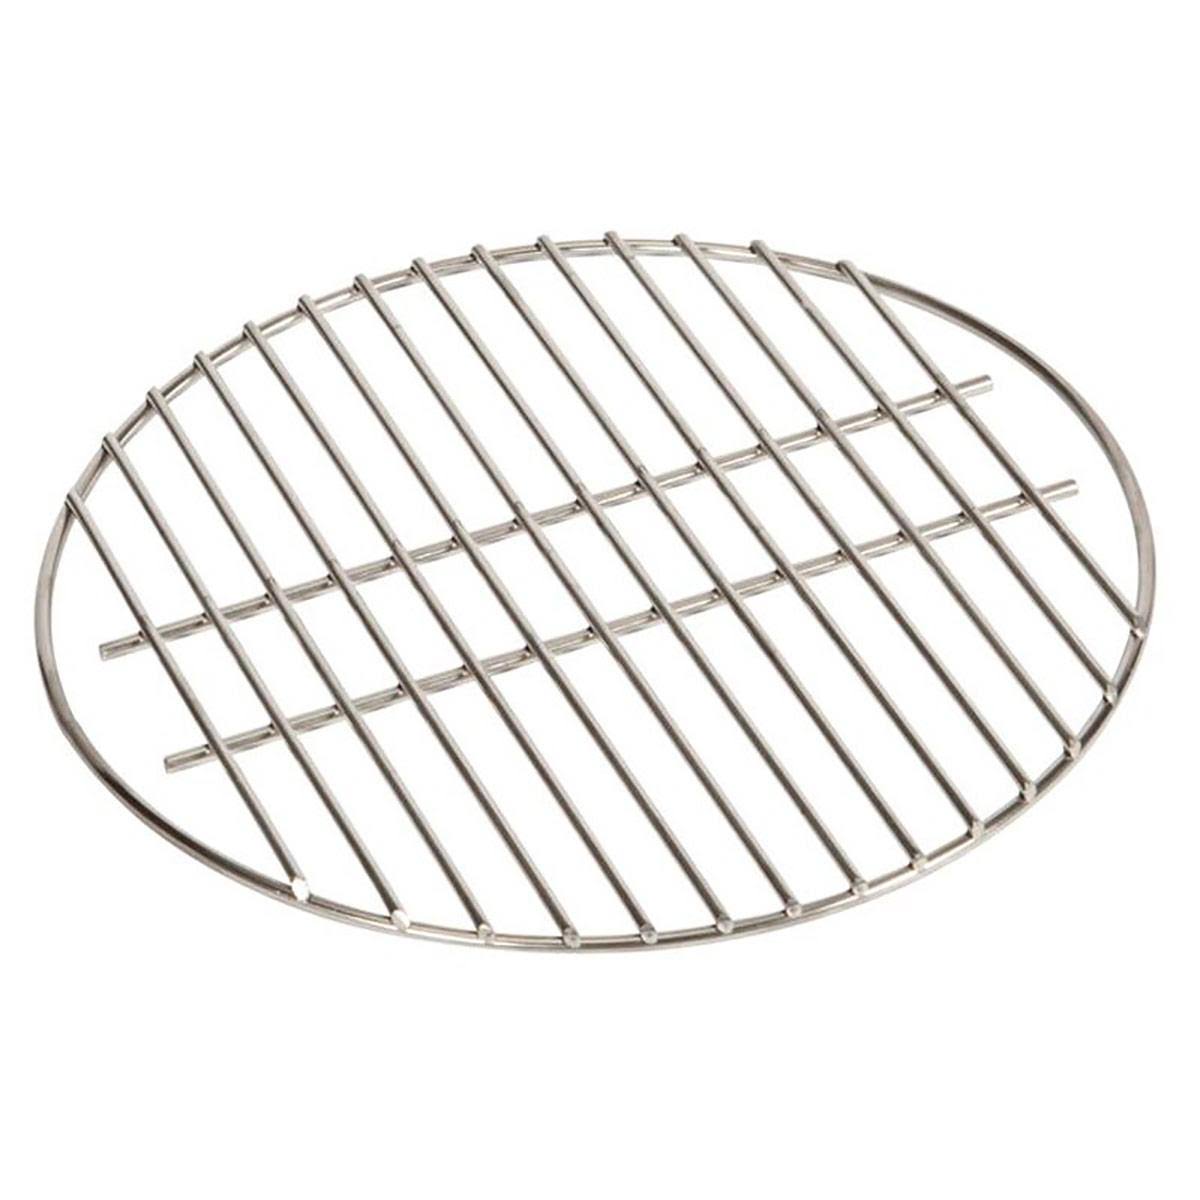 Big Green Egg Stainless Cooking Grill Grate - Medium